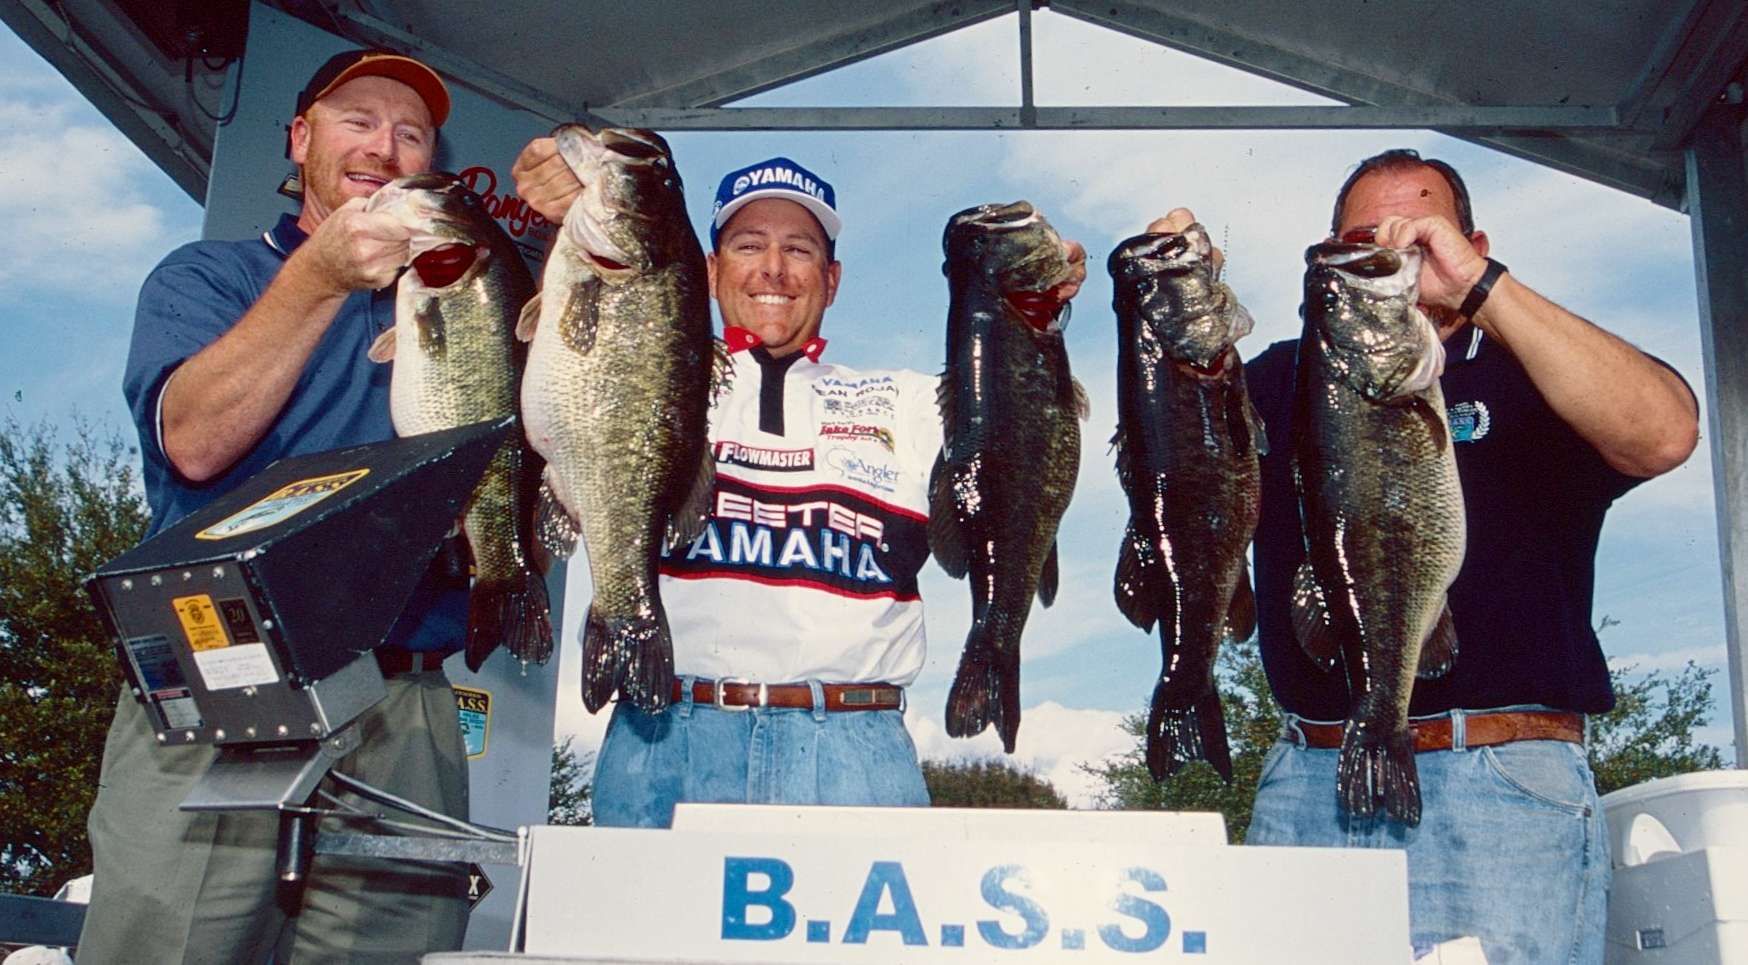 Rojas has four B.A.S.S. wins on his resume. Most special is the 2001 Florida Bassmaster Top 150 held at the Kissimmee Chain of Lakes. 
<p>
That is where Rojas set the B.A.S.S. record for Heaviest Single Day Catch (Five Bass Limit). The haul weighed 45 pounds, 2 ounces. Not surprisingly Kissimmee is one of Rojasâ favorite lakes. 